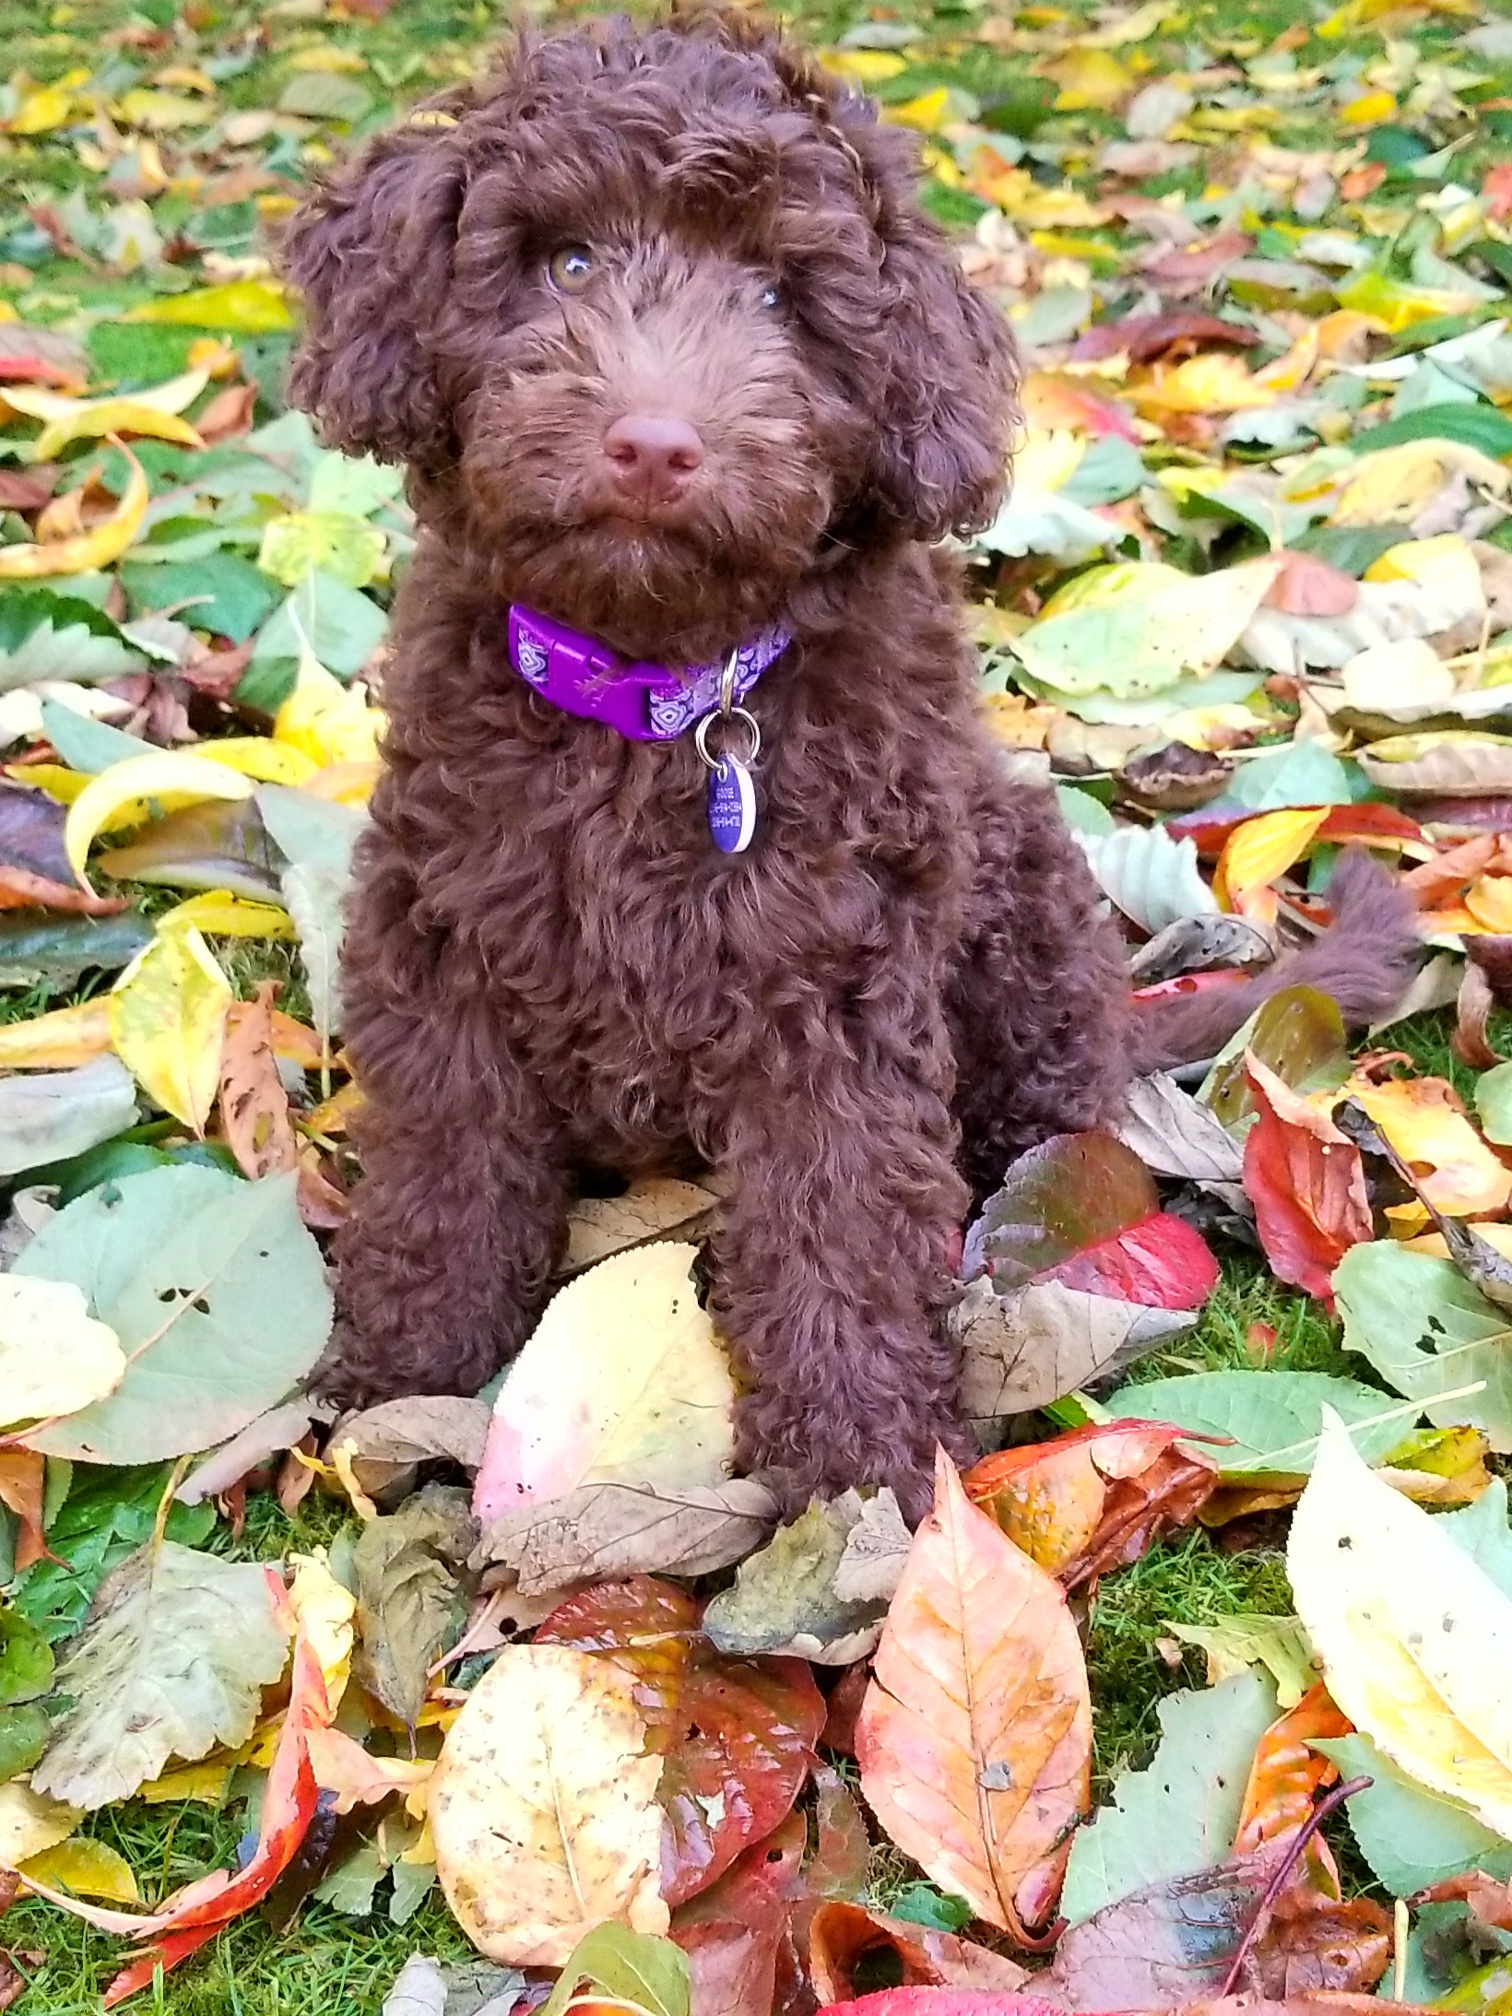 MINI AUSSIEDOODLE "GOOSE" IN THE LEAVES!